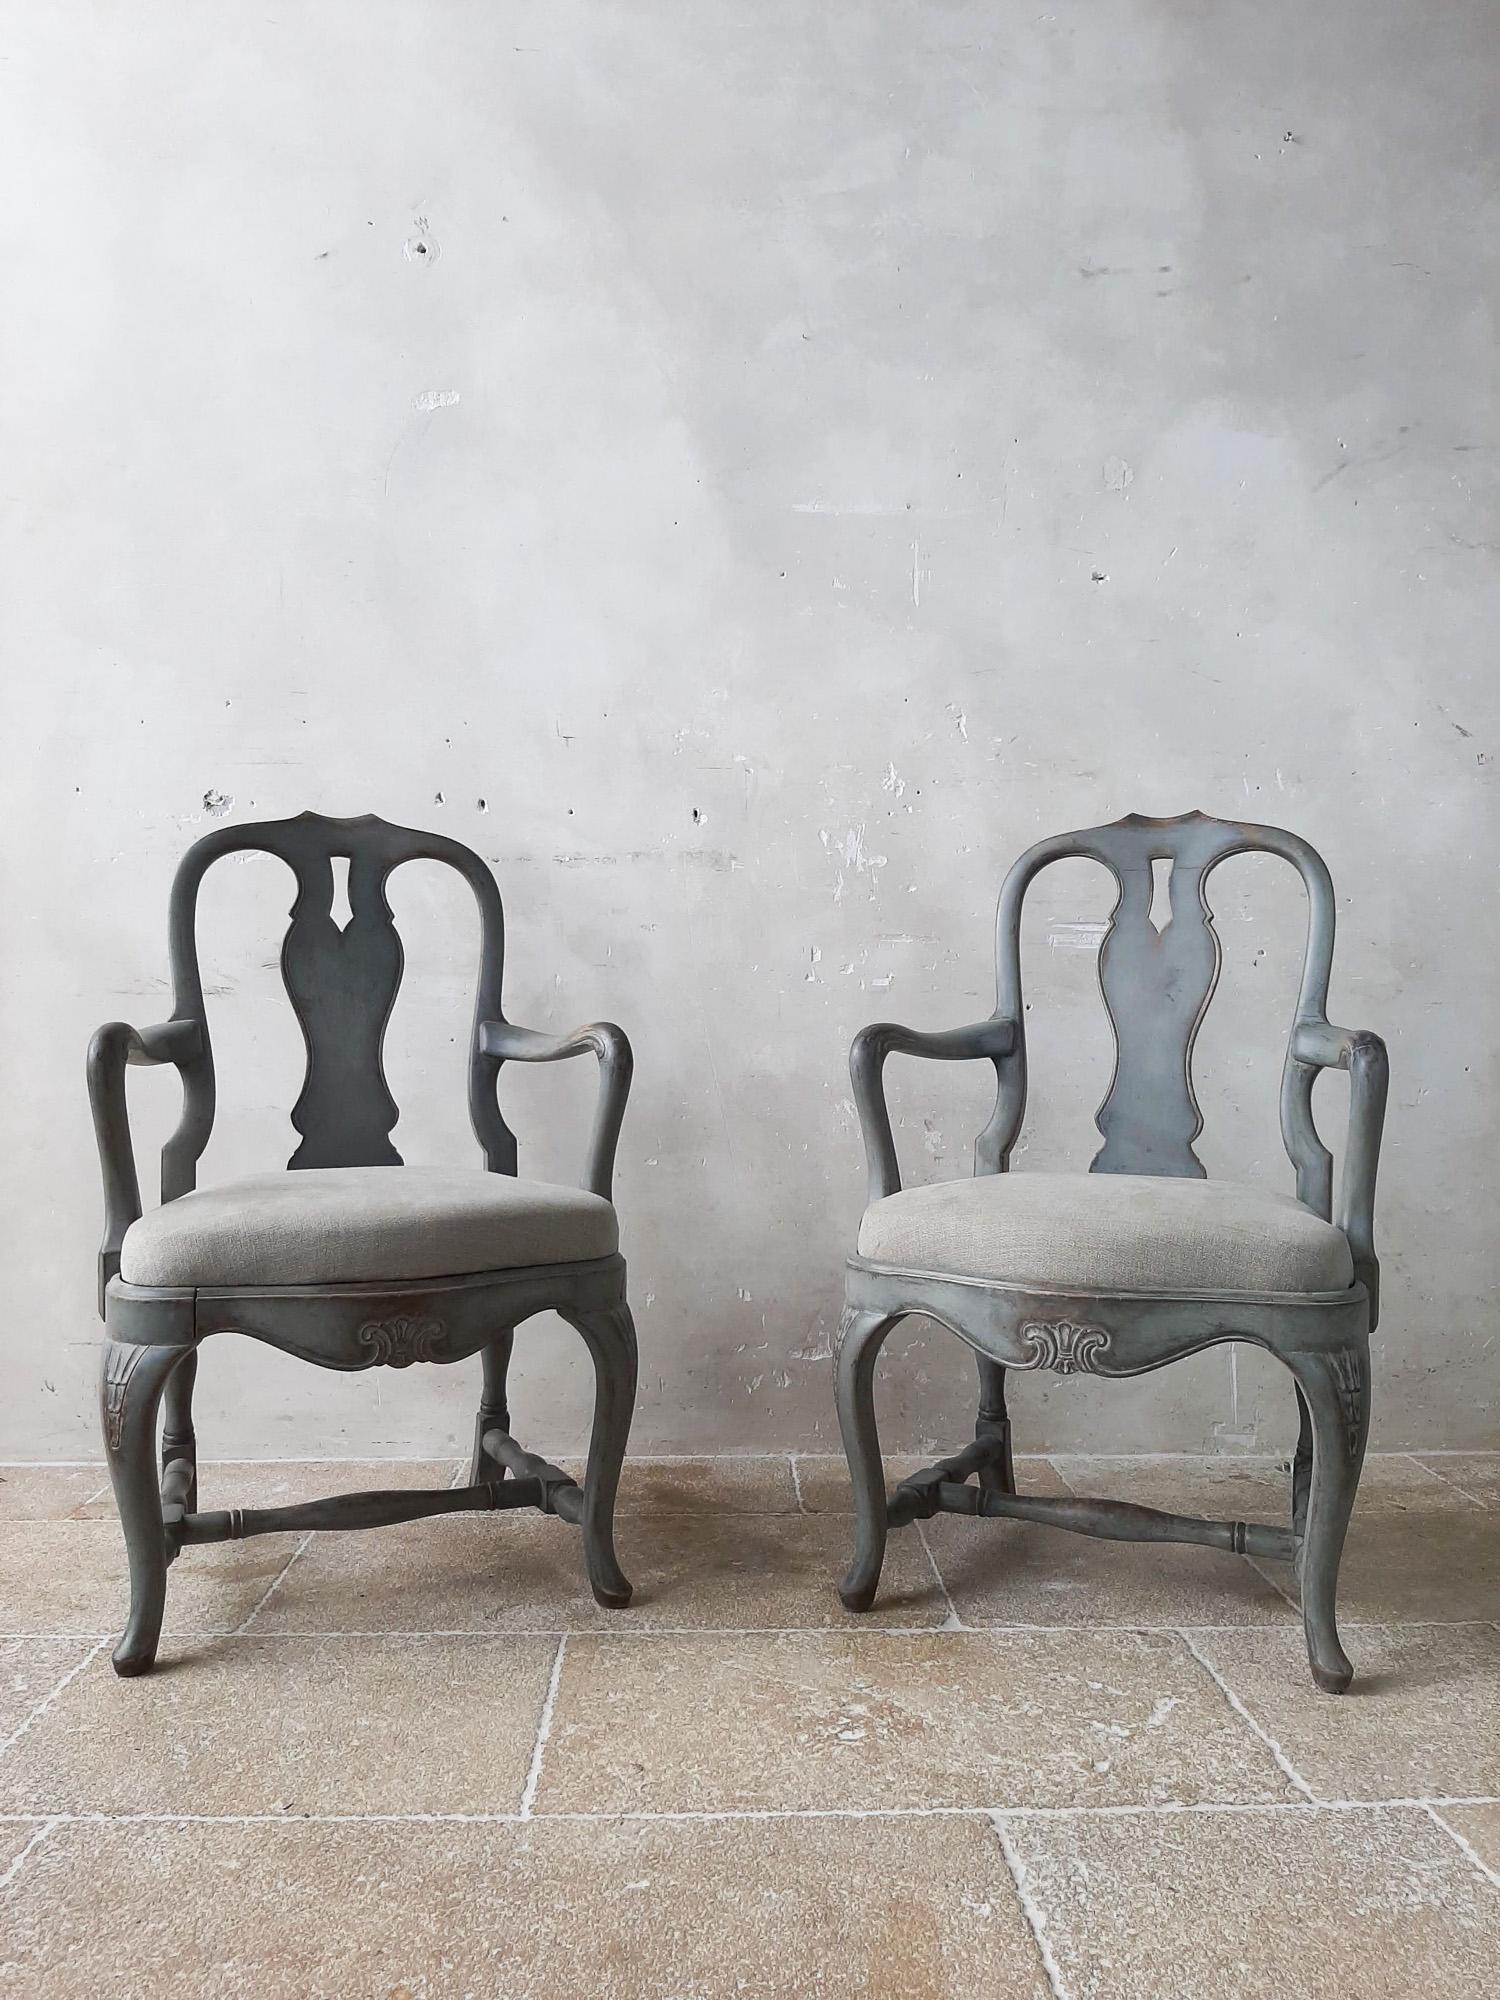 Pair of 19th century Swedish armchairs. These antique wooden chairs have a beautiful carved detail on the front and legs. The look stylish with the old gray patina and new gray upholstery.

Measure: H 98 x W 60 x D 50 cm
seat height 50 cm.